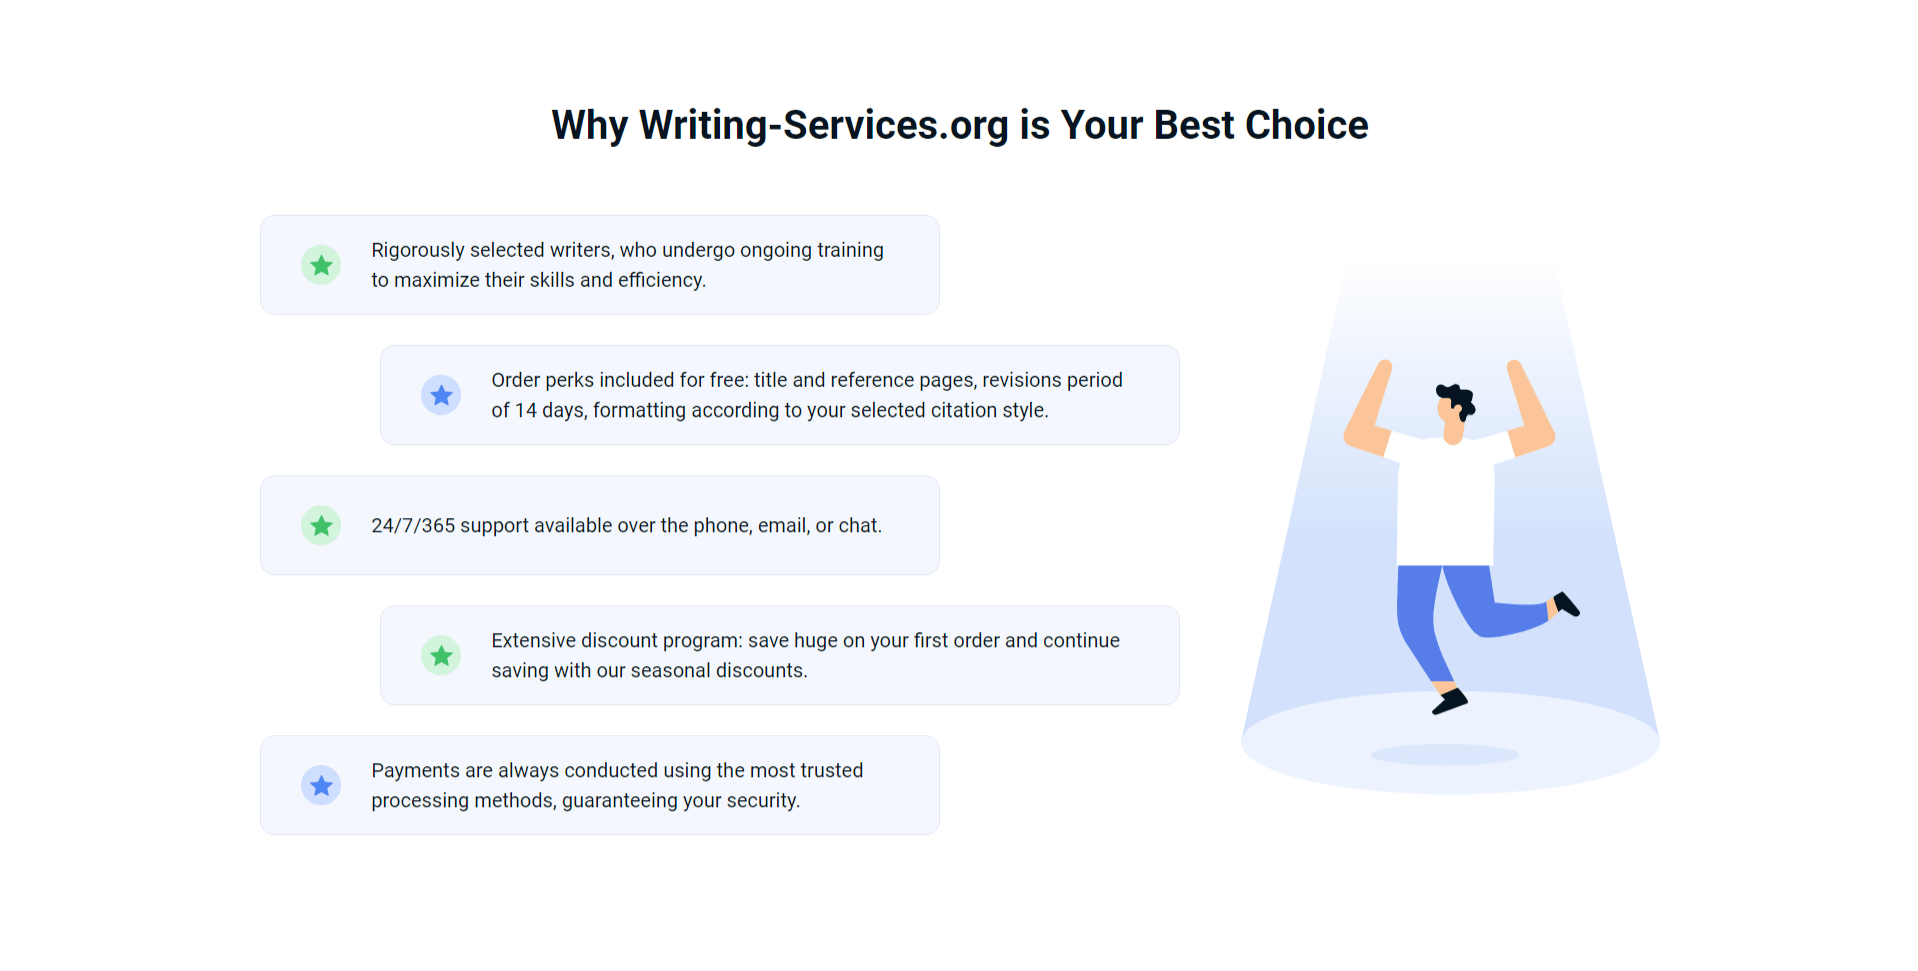 Why Writing-Services.org is Your Best Choice.